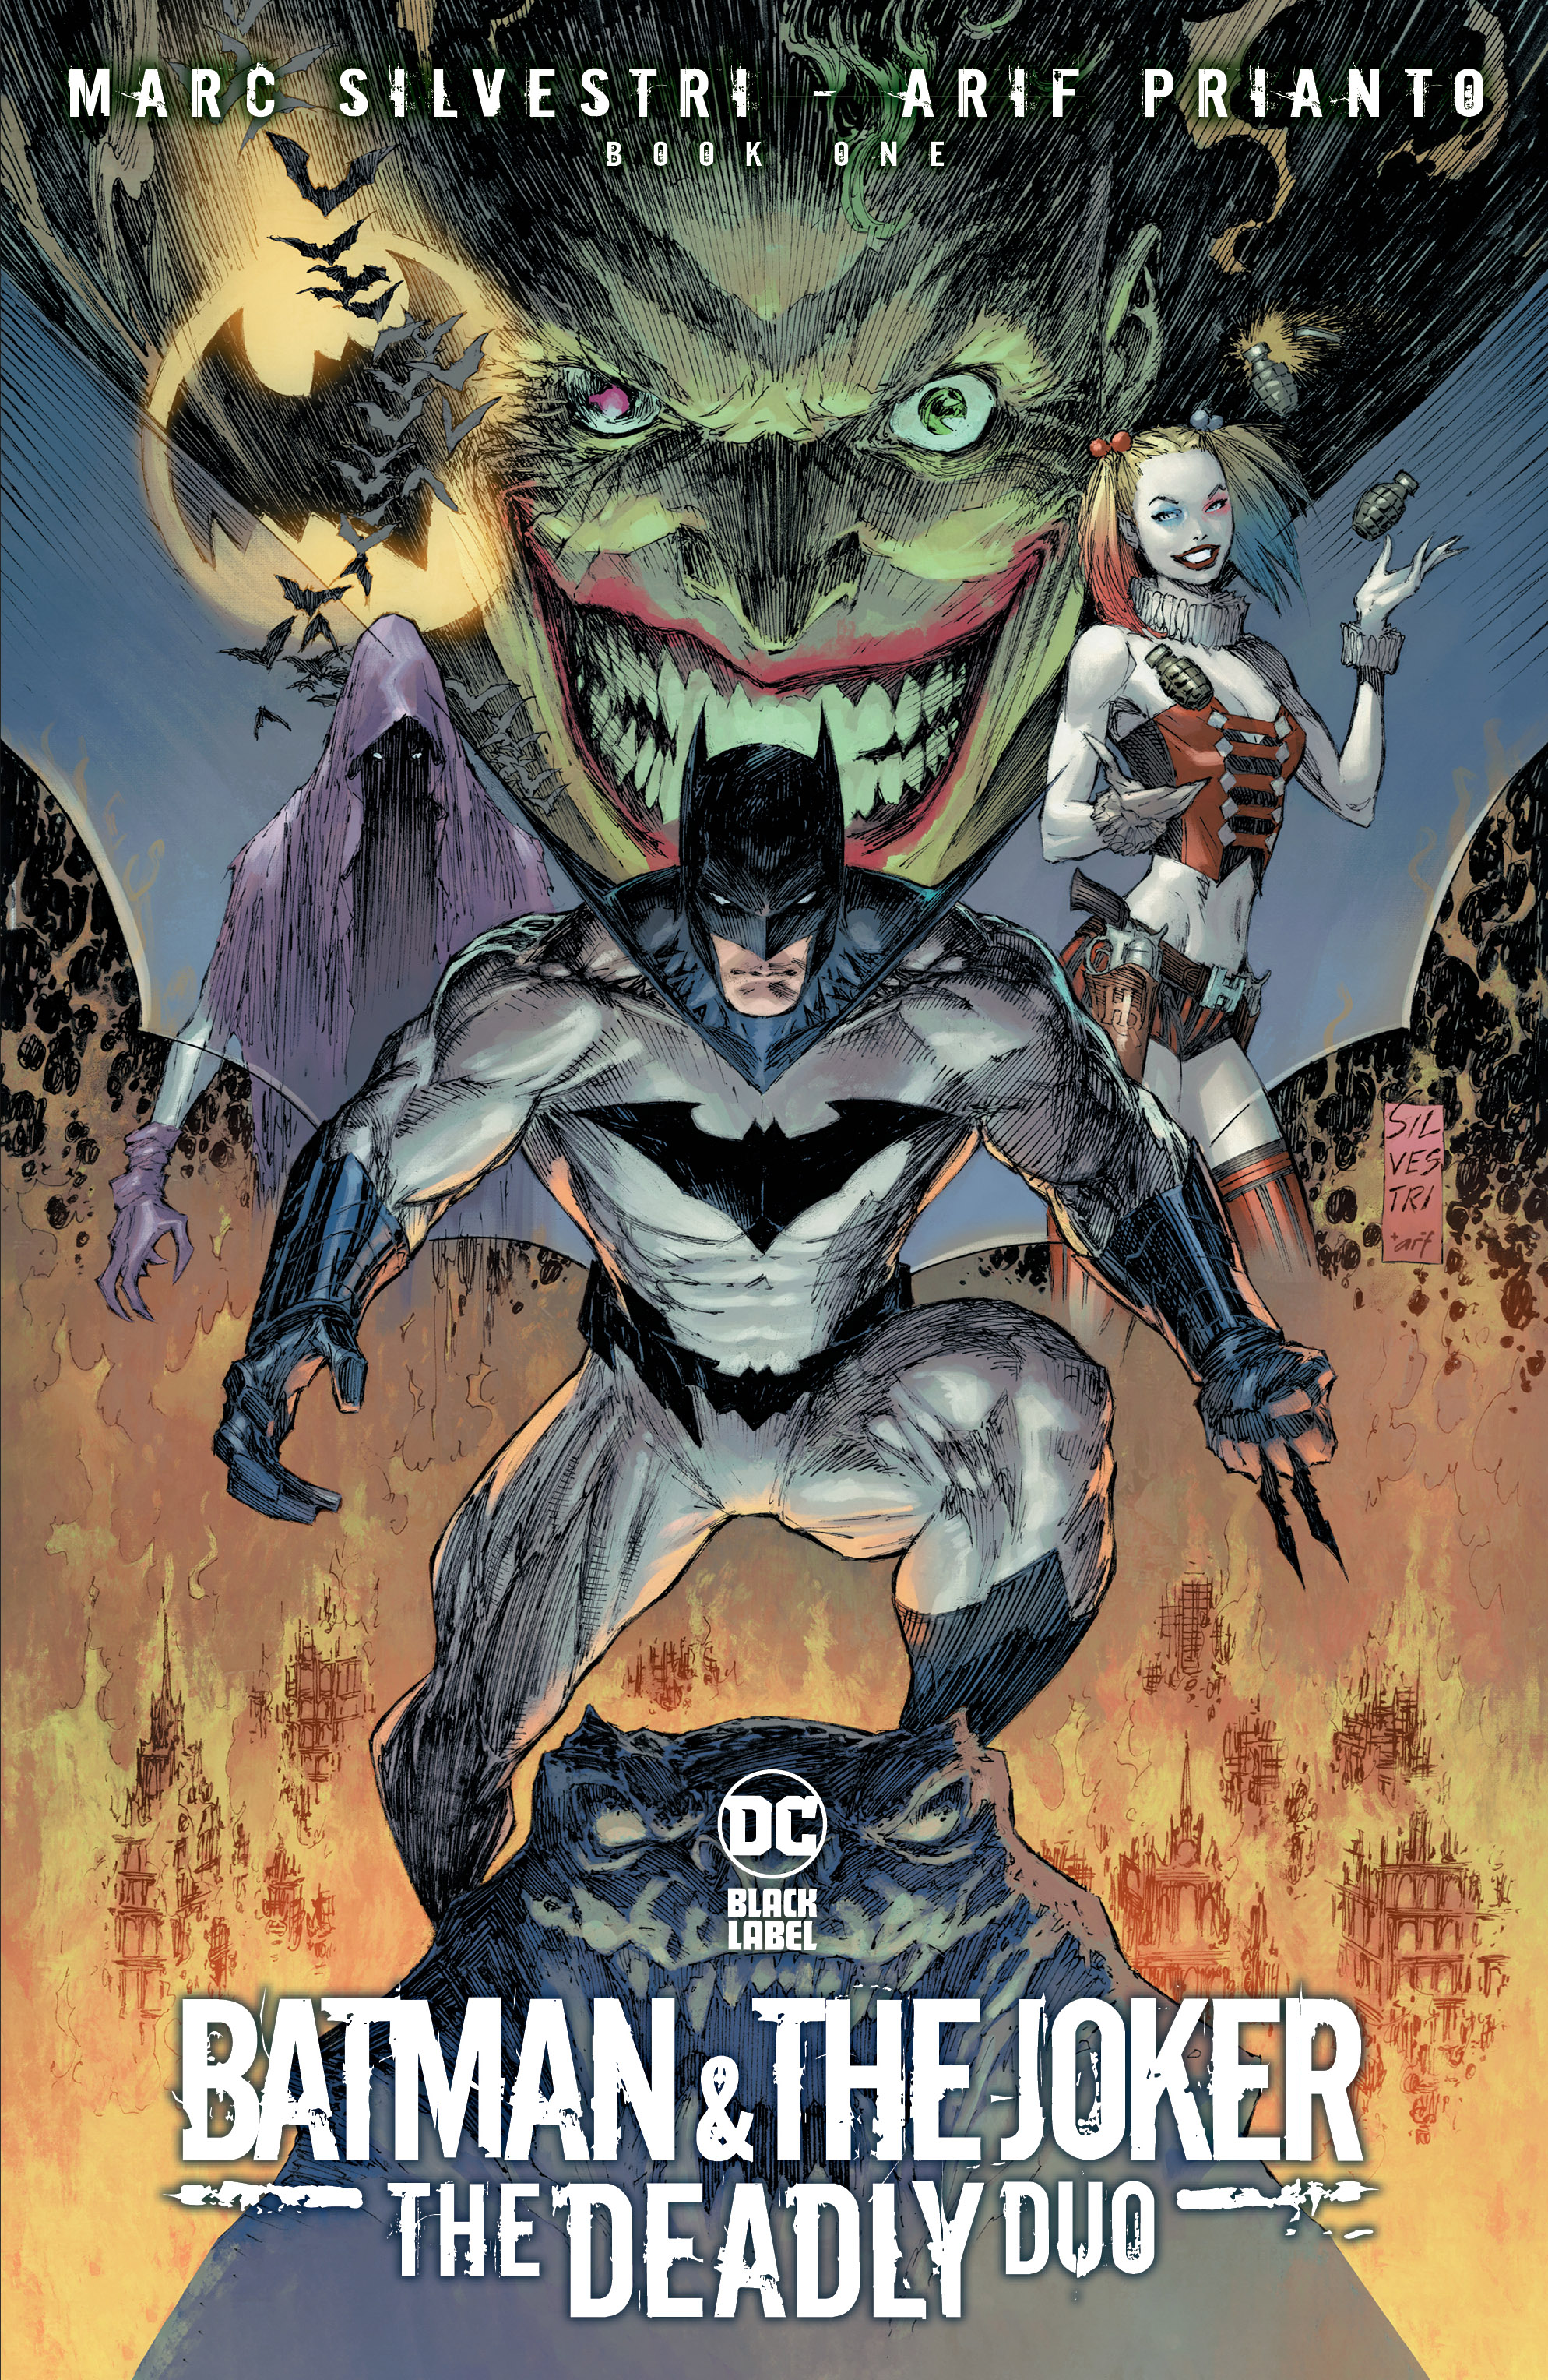 Batman & The Joker The Deadly Duo #1 Cover A Marc Silvestri (Mature) (Of 7)